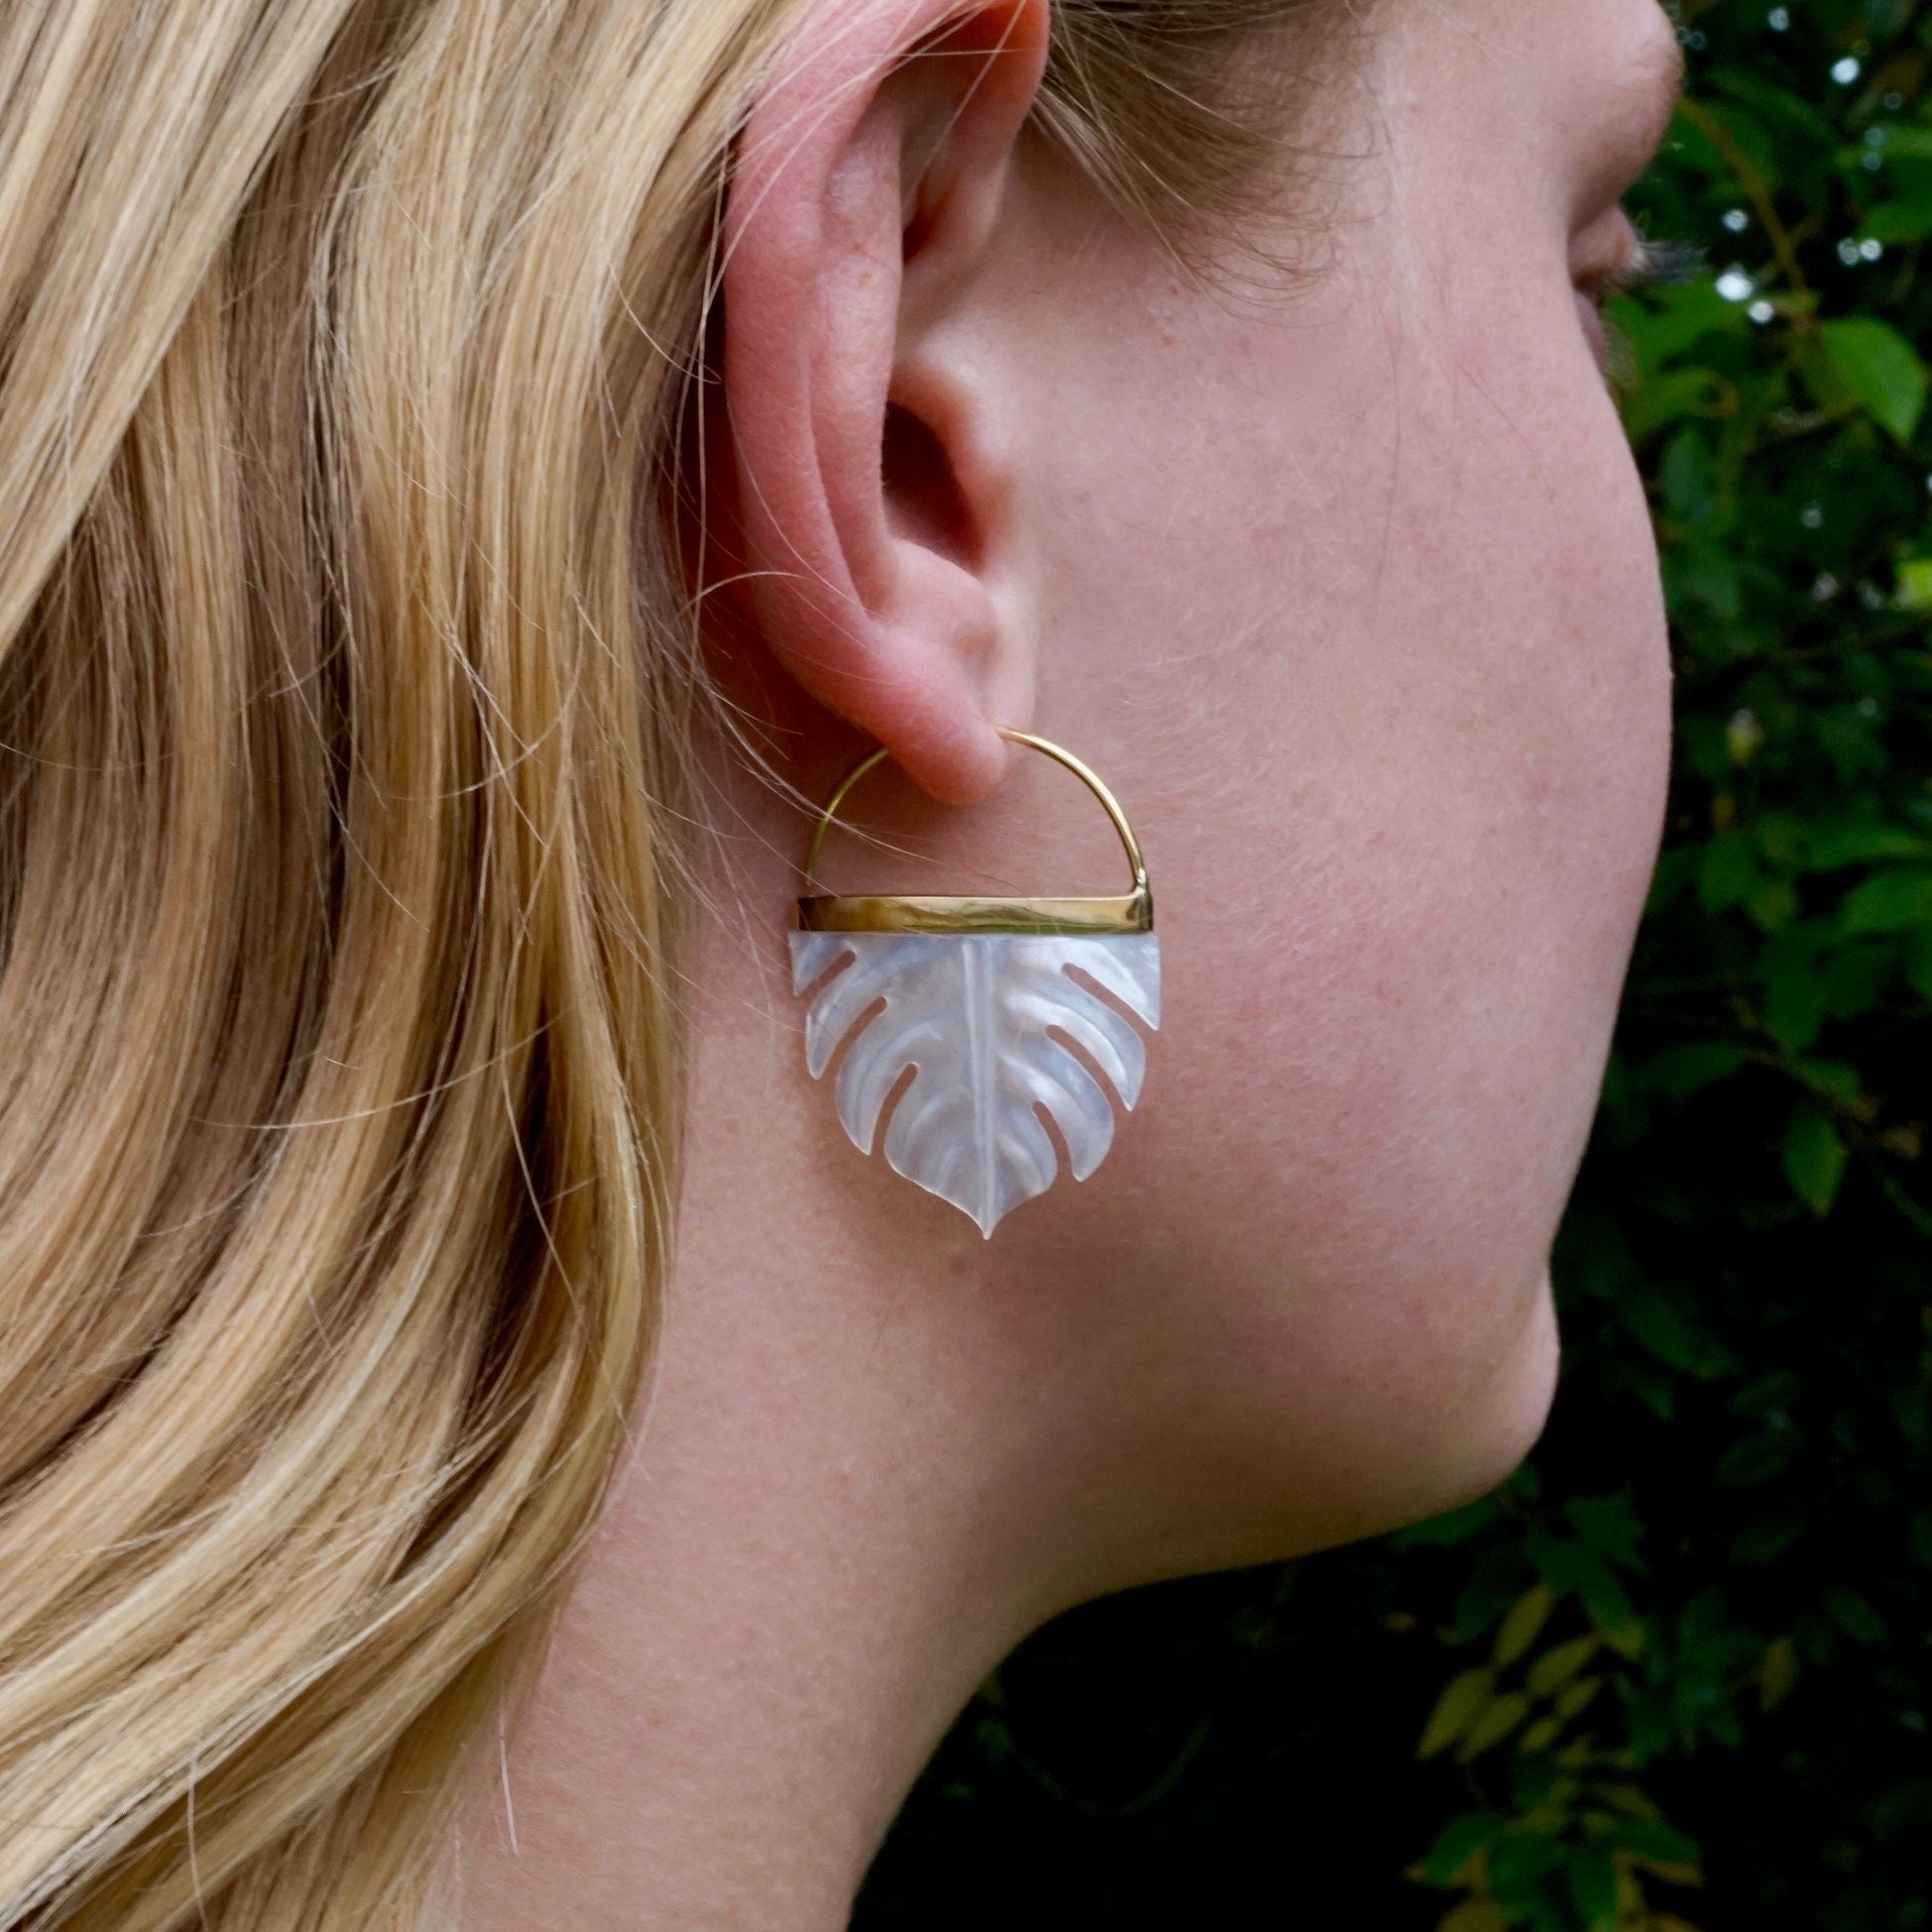 Tropical Leaf Earrings in mother of pearl with sterling silver bezel (S254)